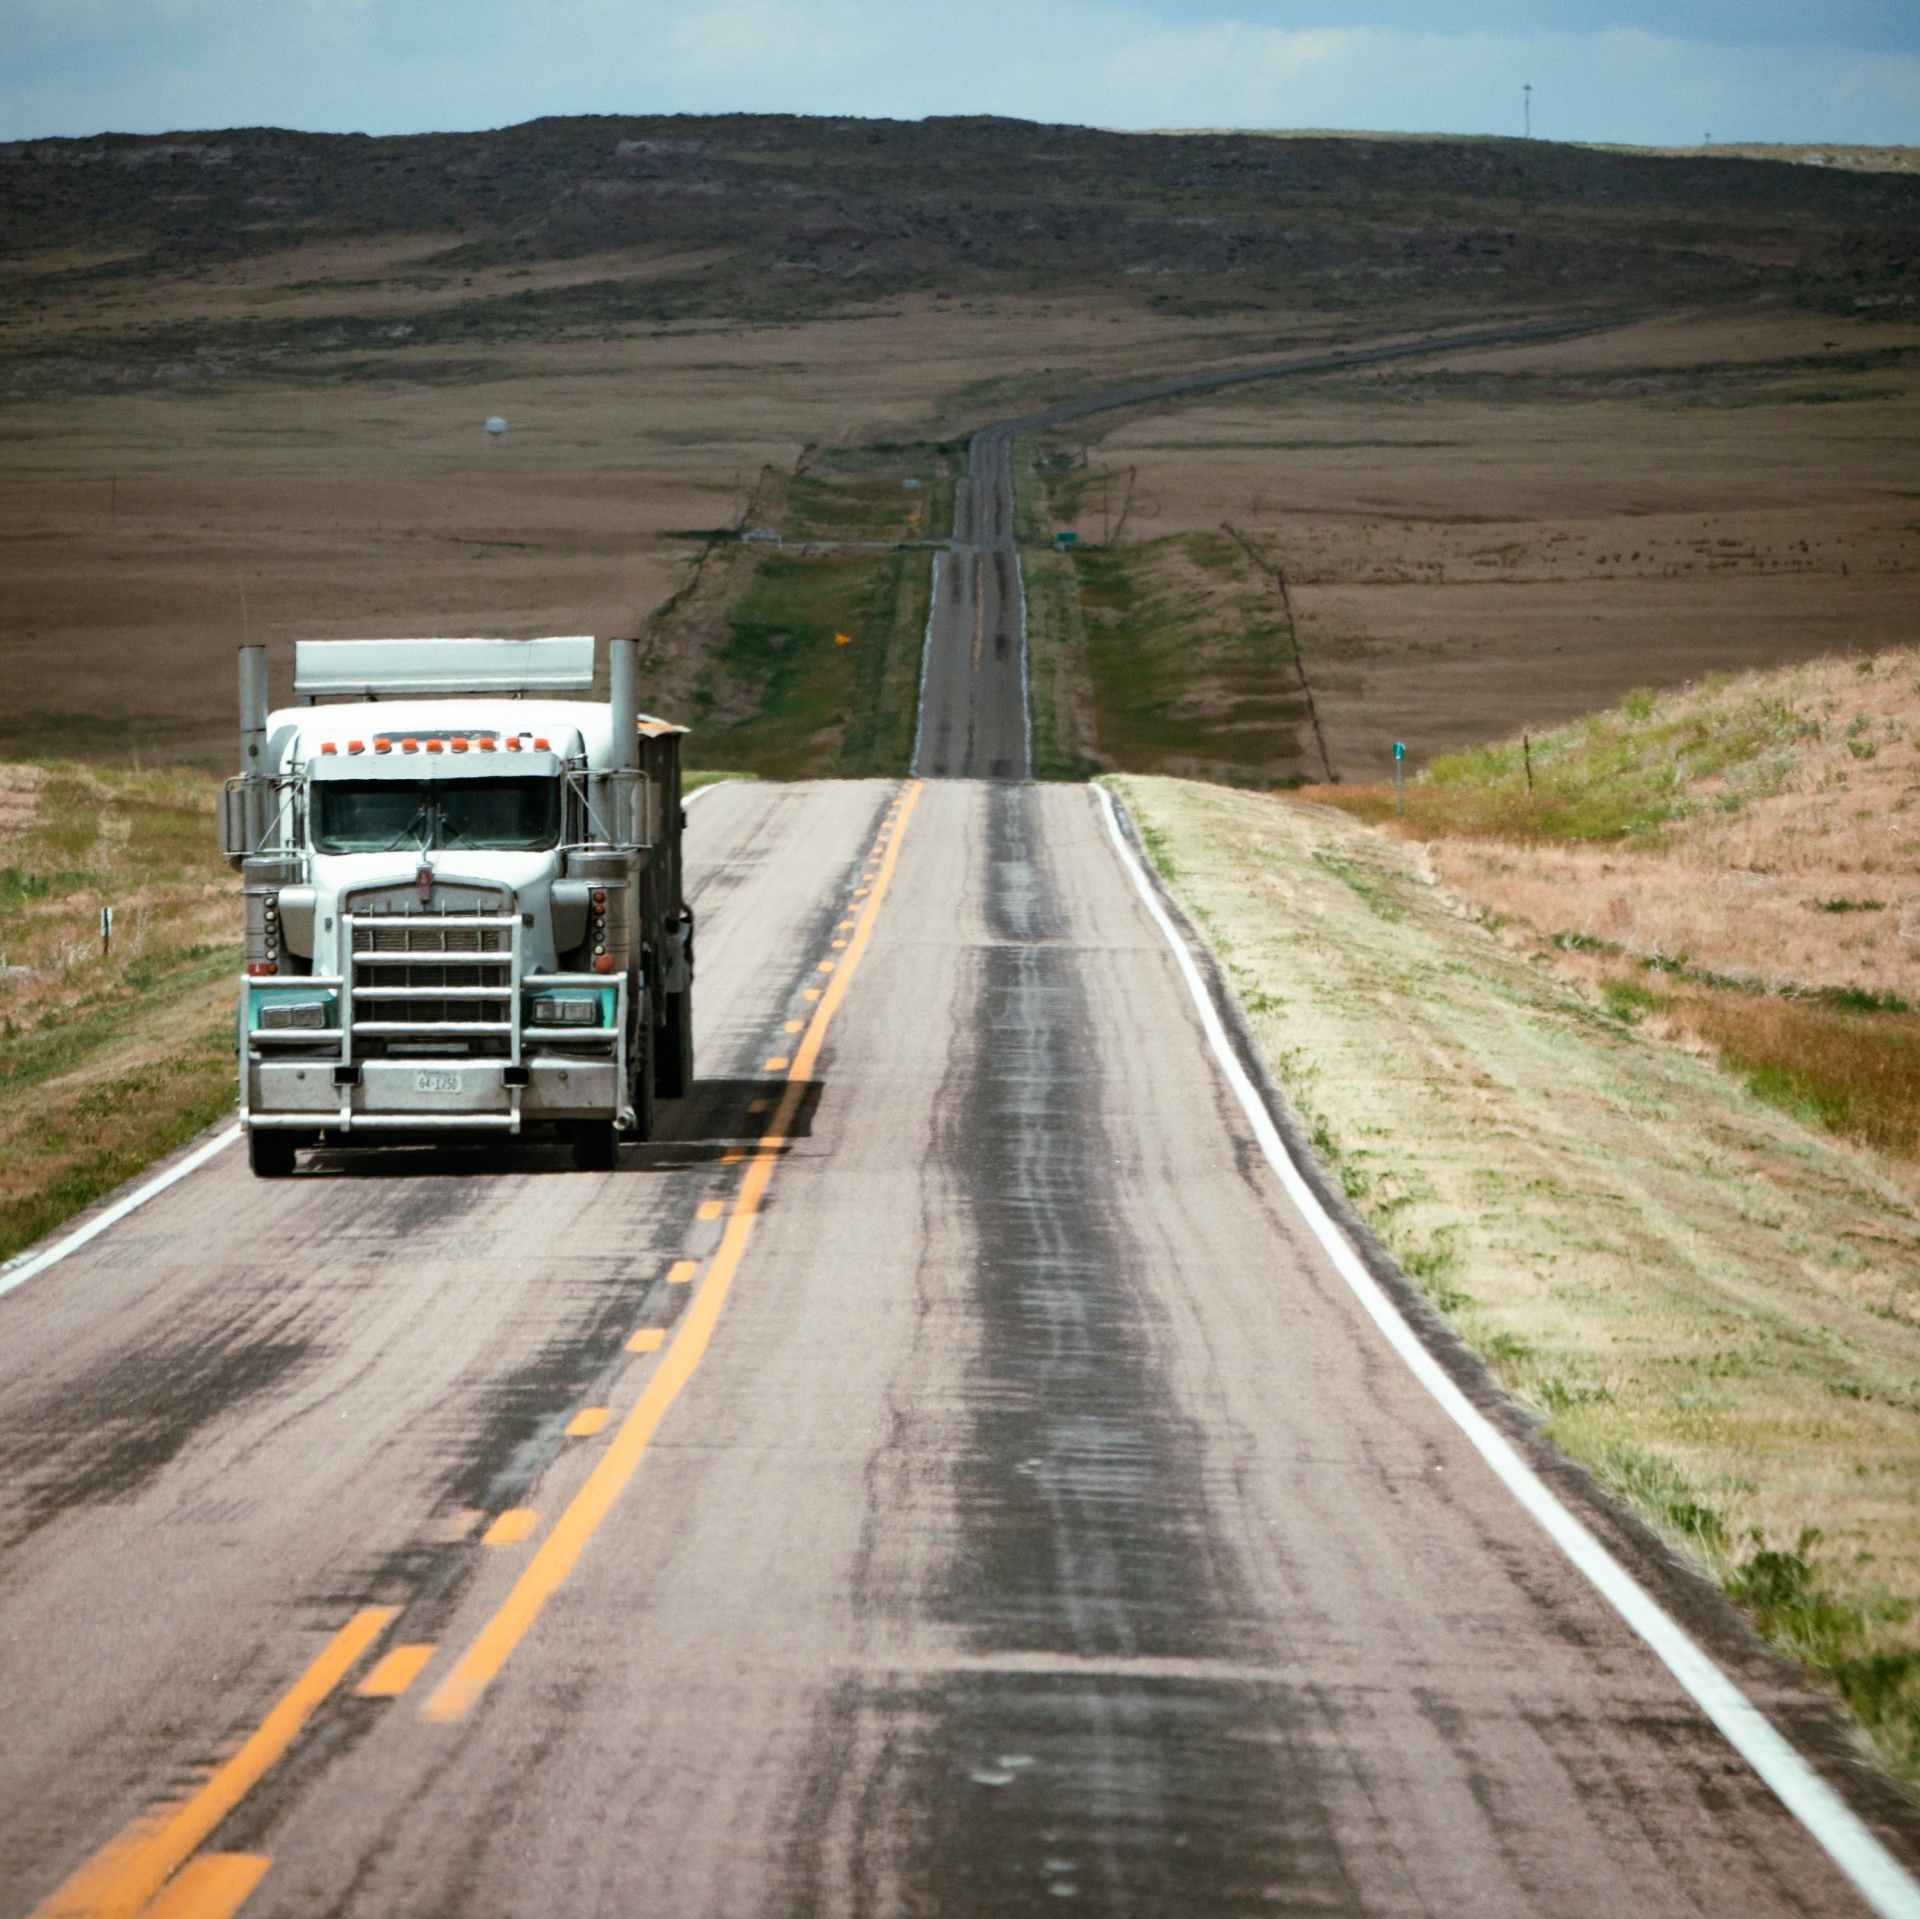 A truck driving on the road